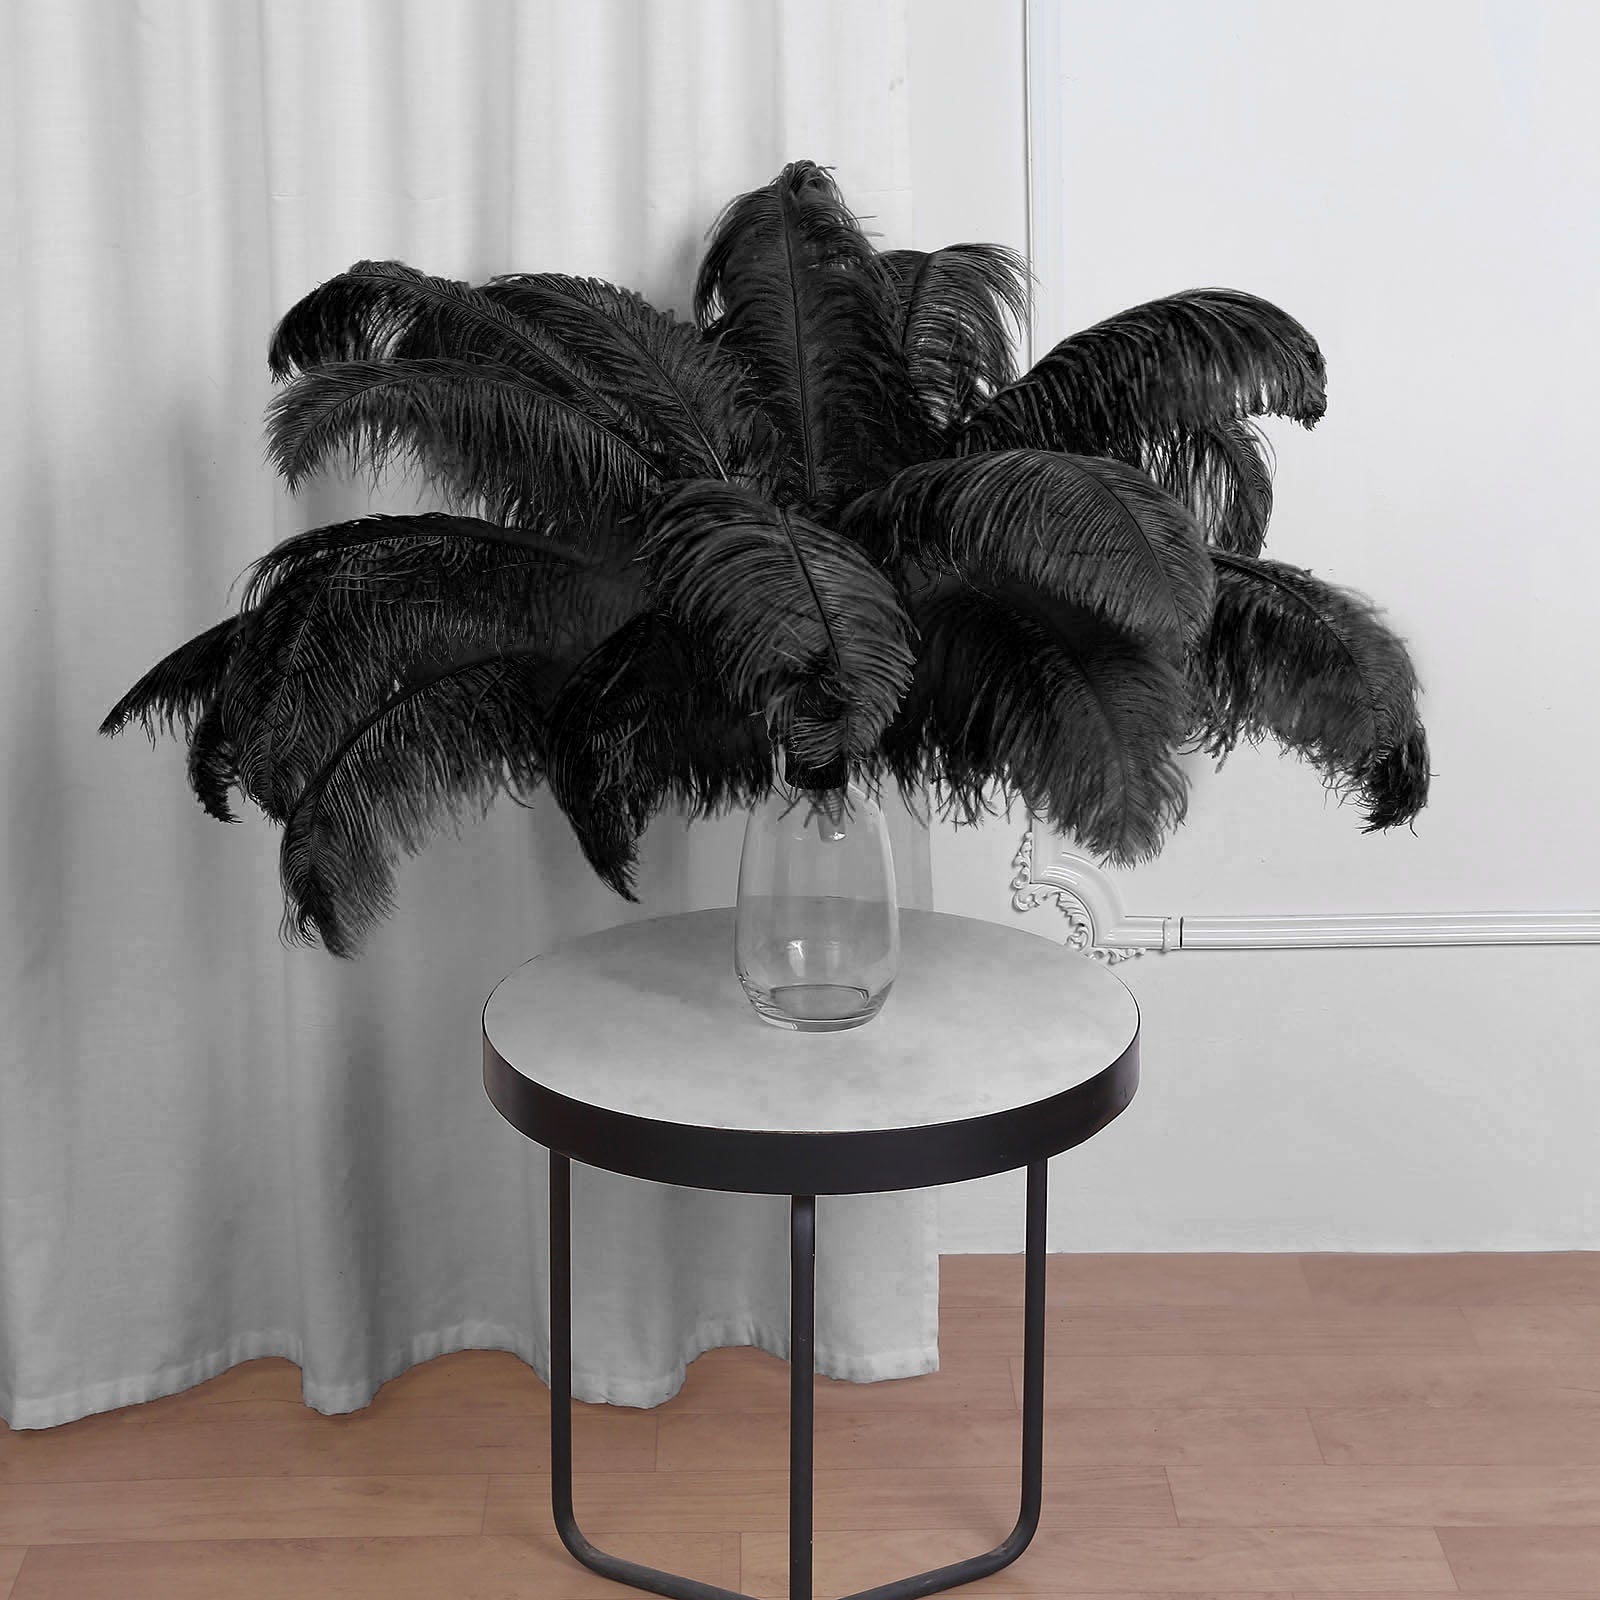  Yinder 150 Pieces Ostrich Feathers Bulk Natural Ostrich  Feathers Plumes for Centerpieces 10-12 Inch/ 8-10 Inch for Wedding Party  Centerpieces for Vase Flower Arrangement and Home Decoration (Black) :  Arts, Crafts & Sewing